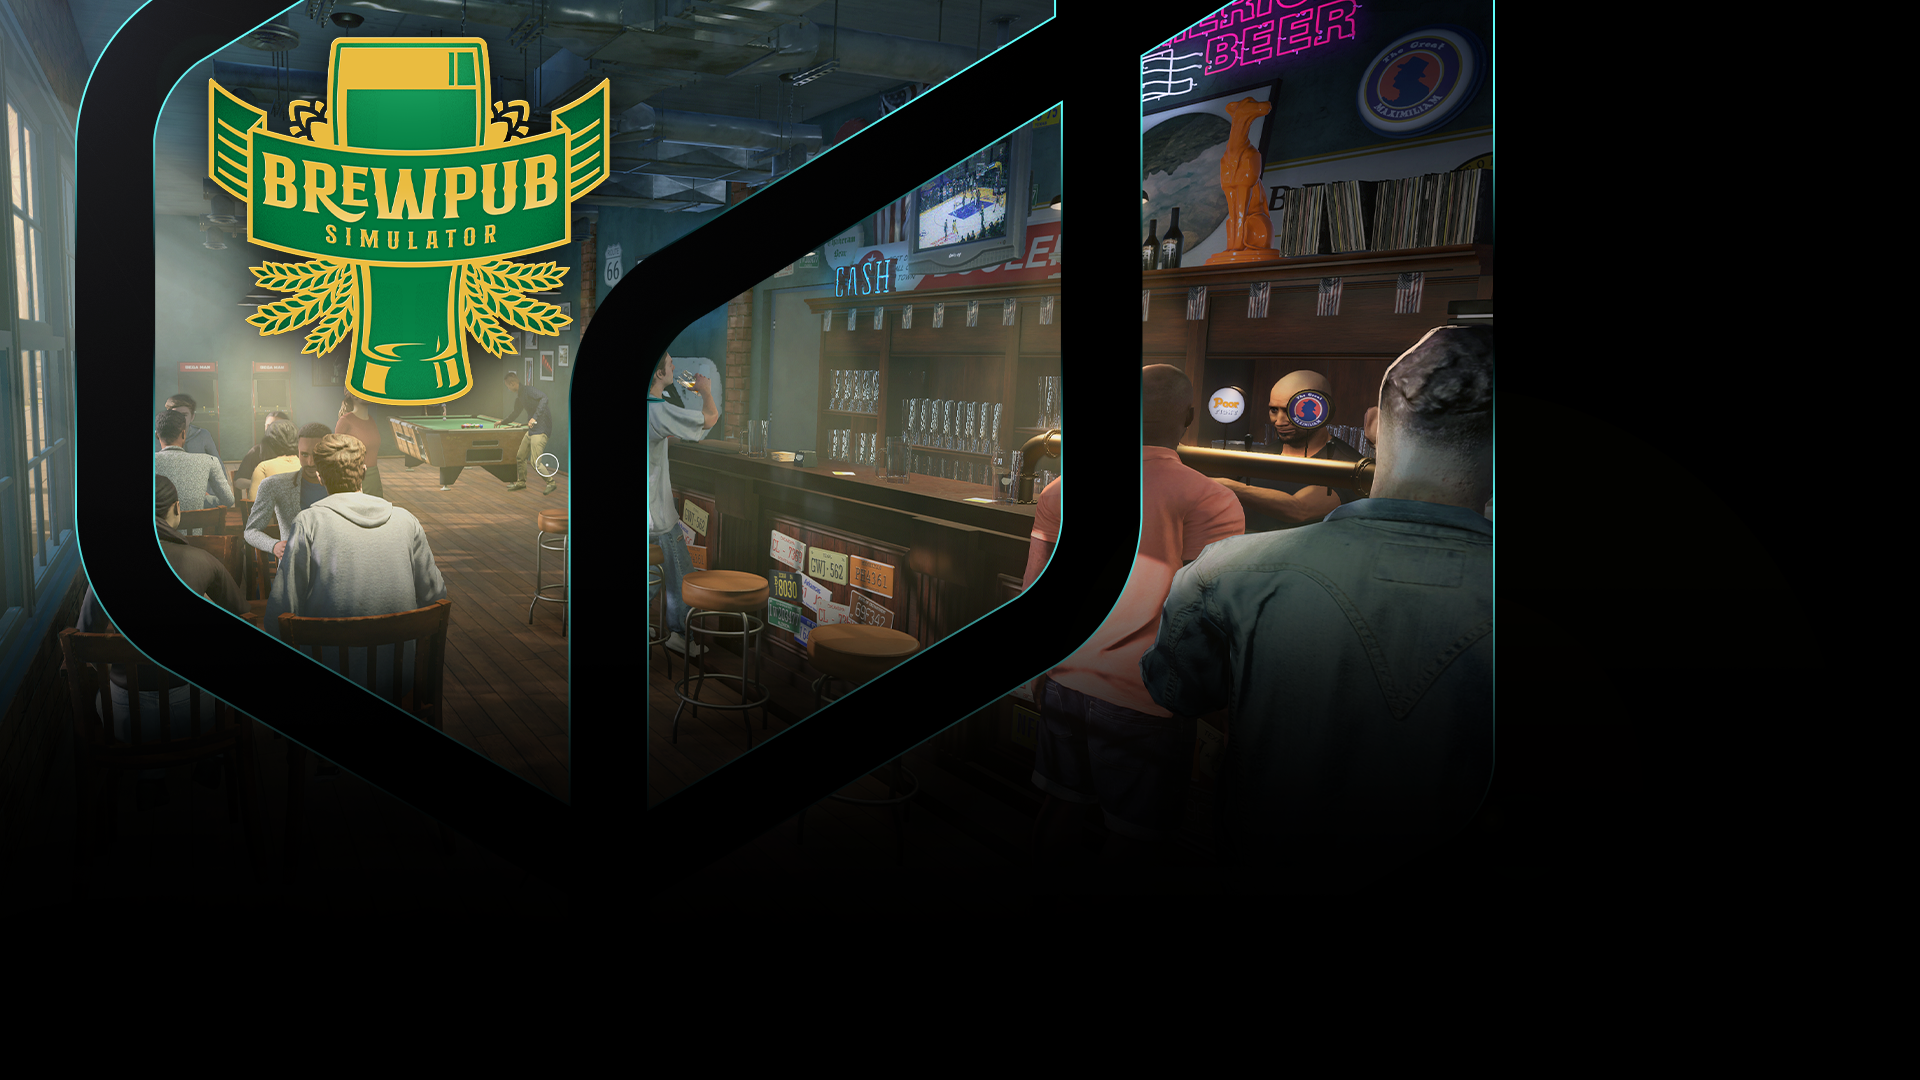 <span style="text-align: center;">brewpub simulator<br><span class="outline">win a full game<span></span>